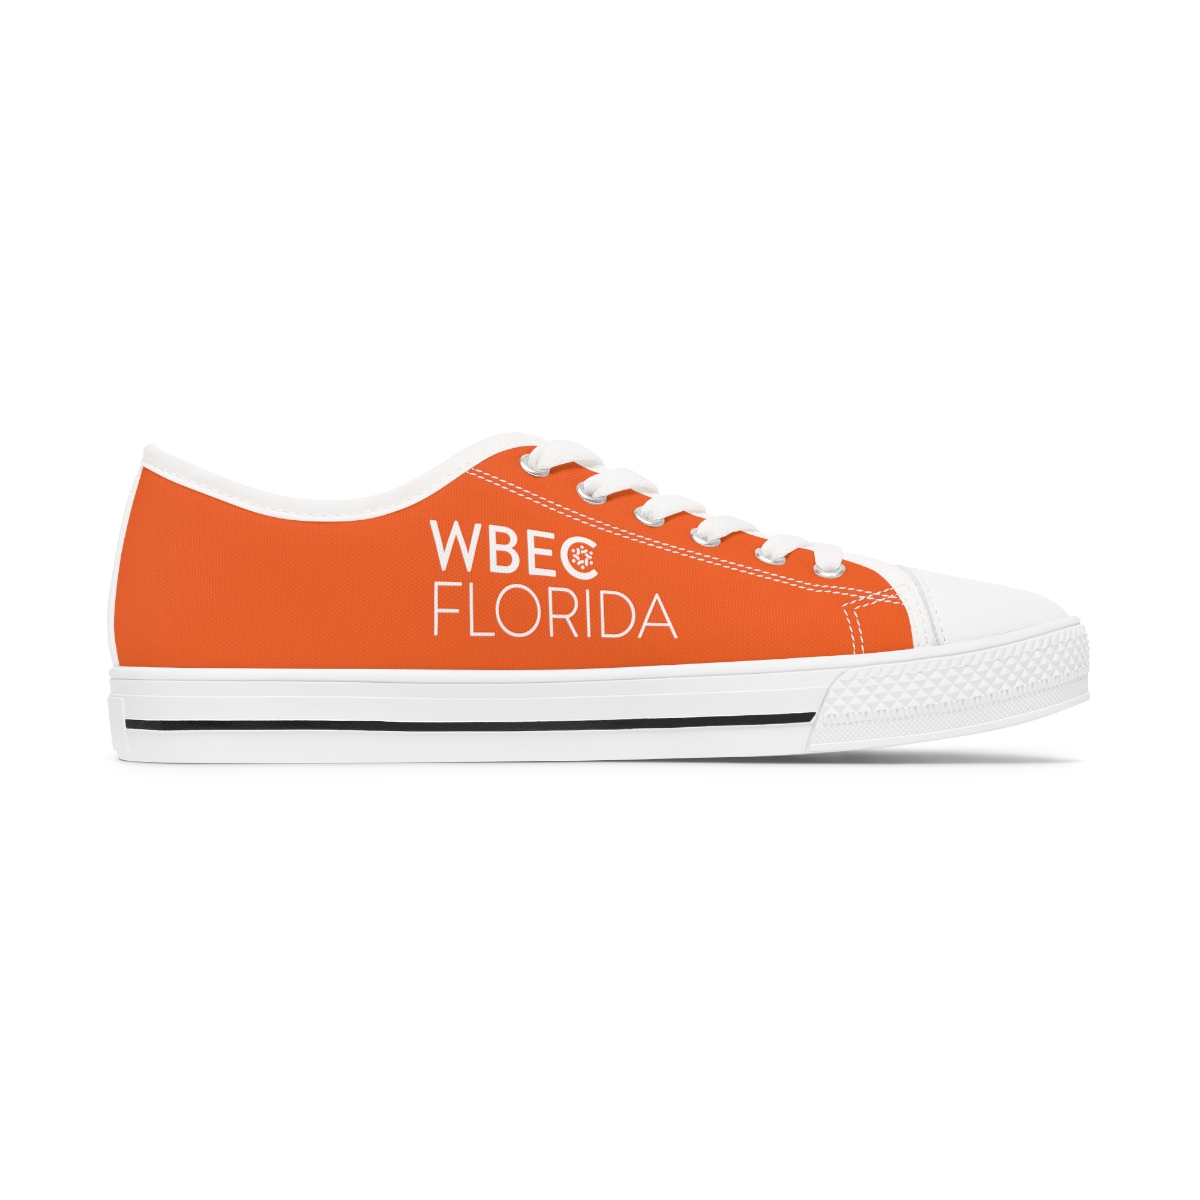 Women's Low Top Sneakers product thumbnail image